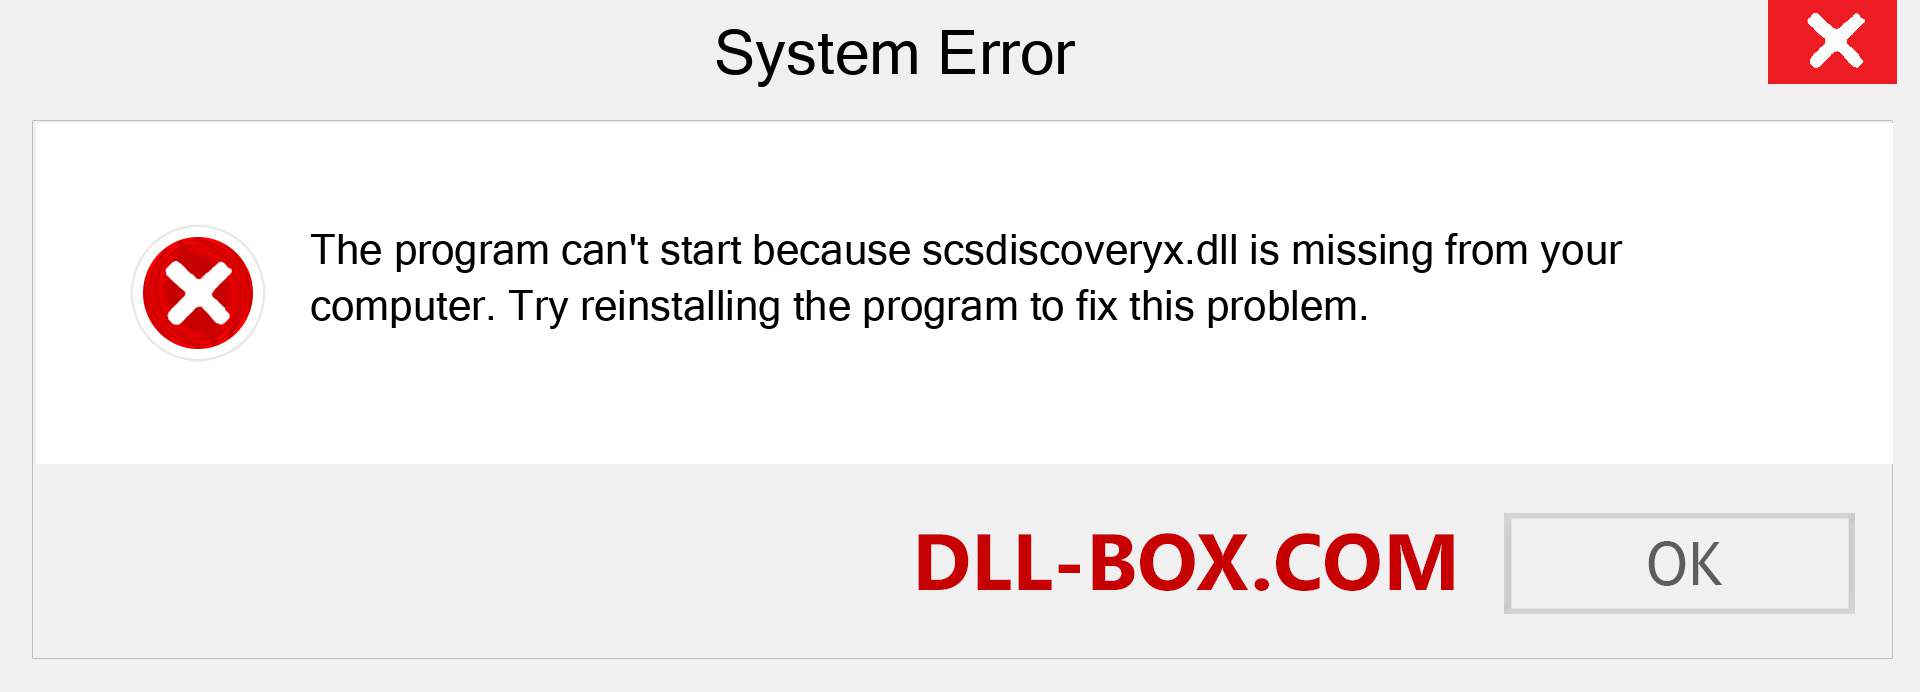  scsdiscoveryx.dll file is missing?. Download for Windows 7, 8, 10 - Fix  scsdiscoveryx dll Missing Error on Windows, photos, images